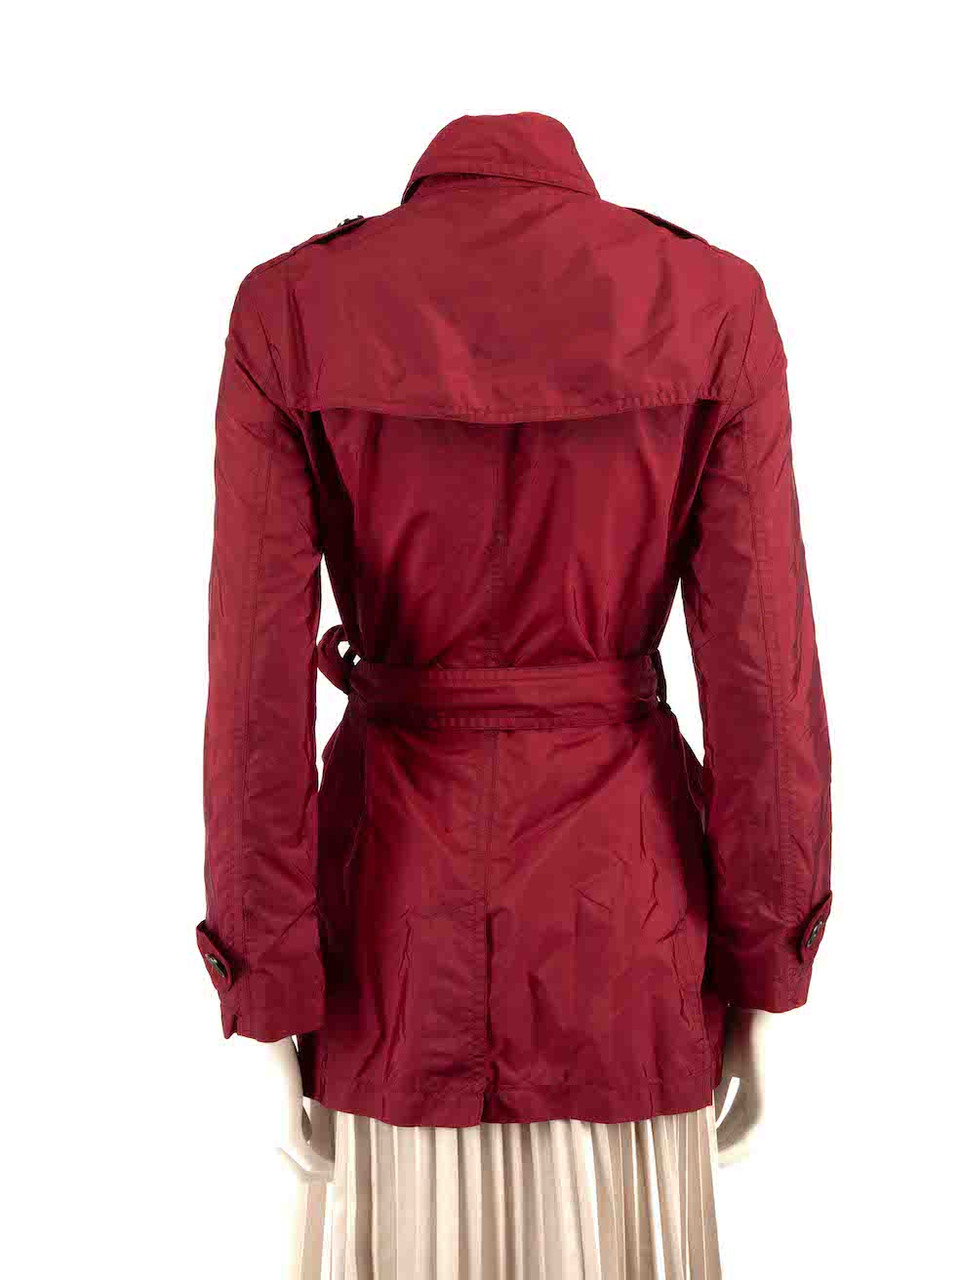 Burberry Burberry Brit Red Double-Breasted Belted Trench Coat